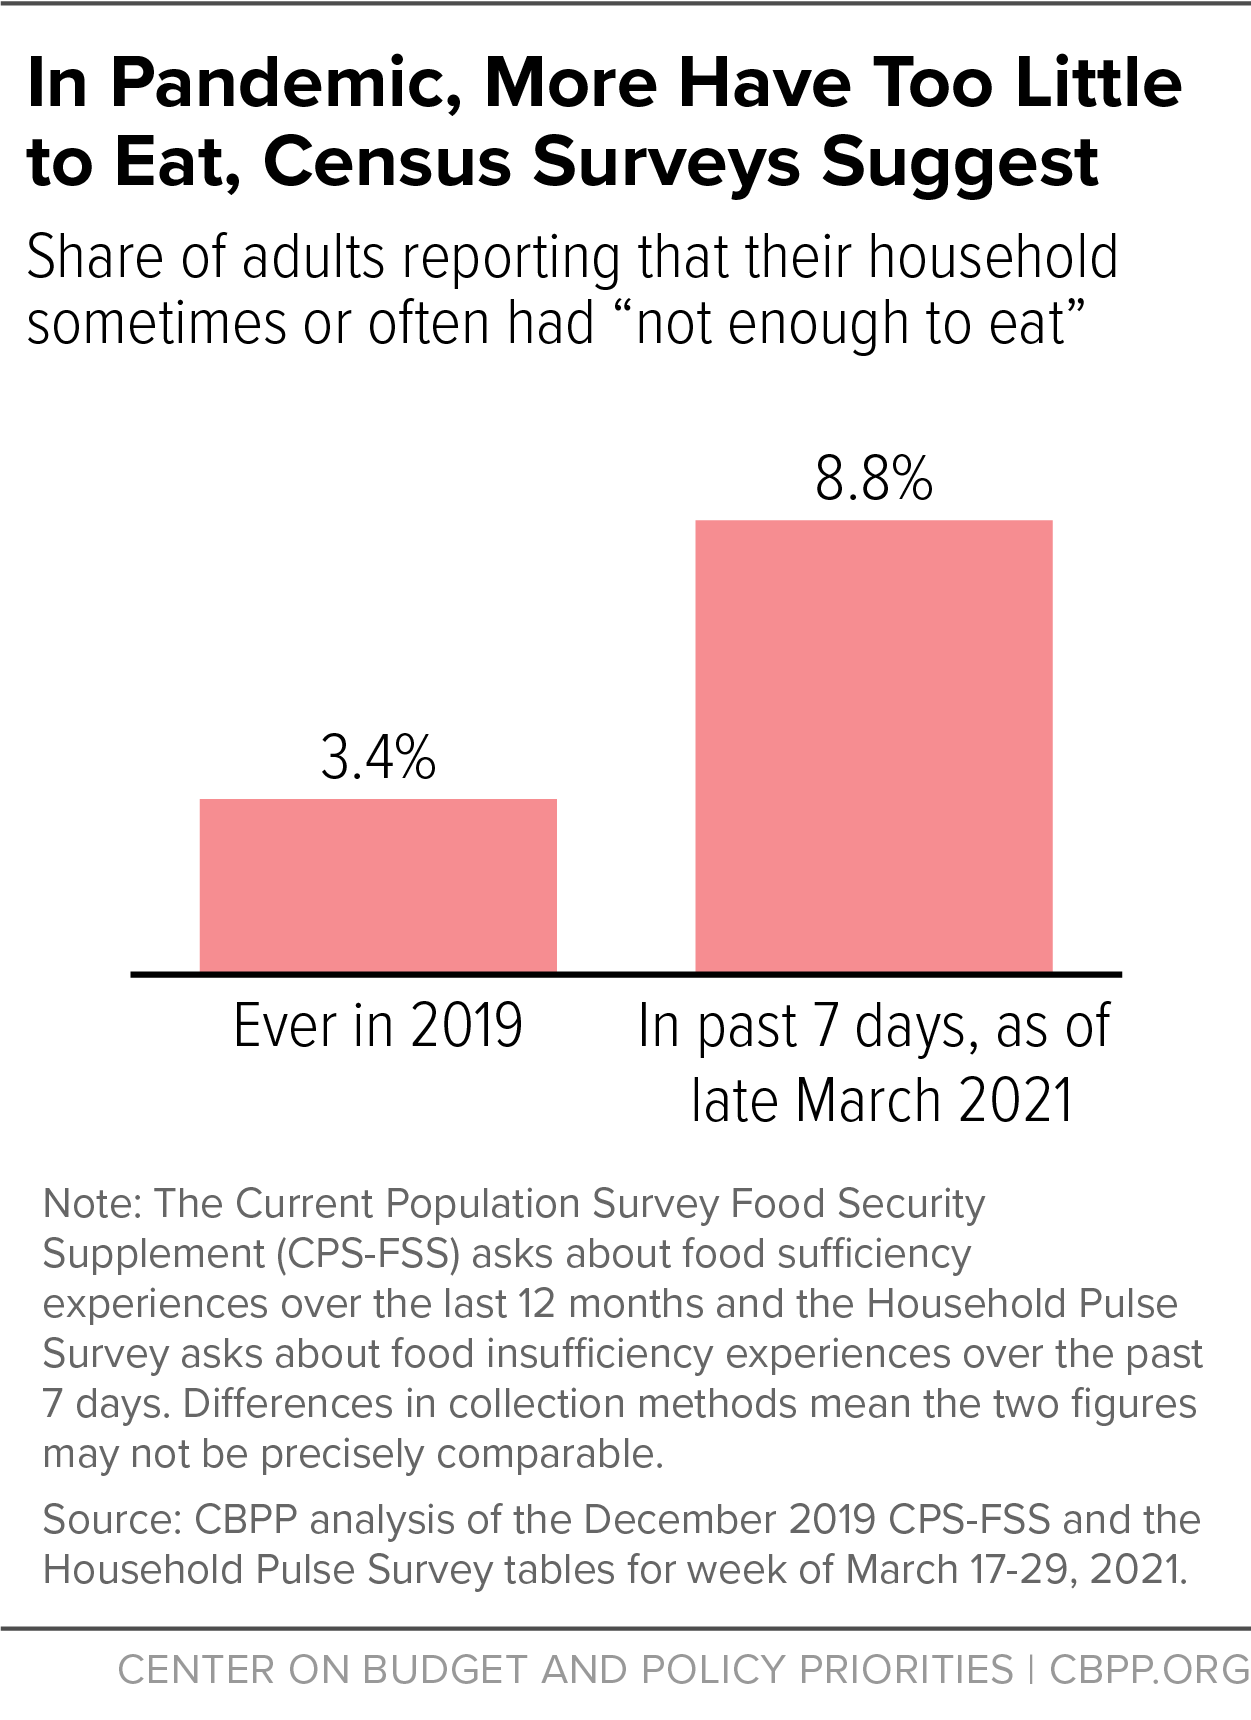 In Pandemic, More Have Too Little to Eat, Census Surveys Suggest